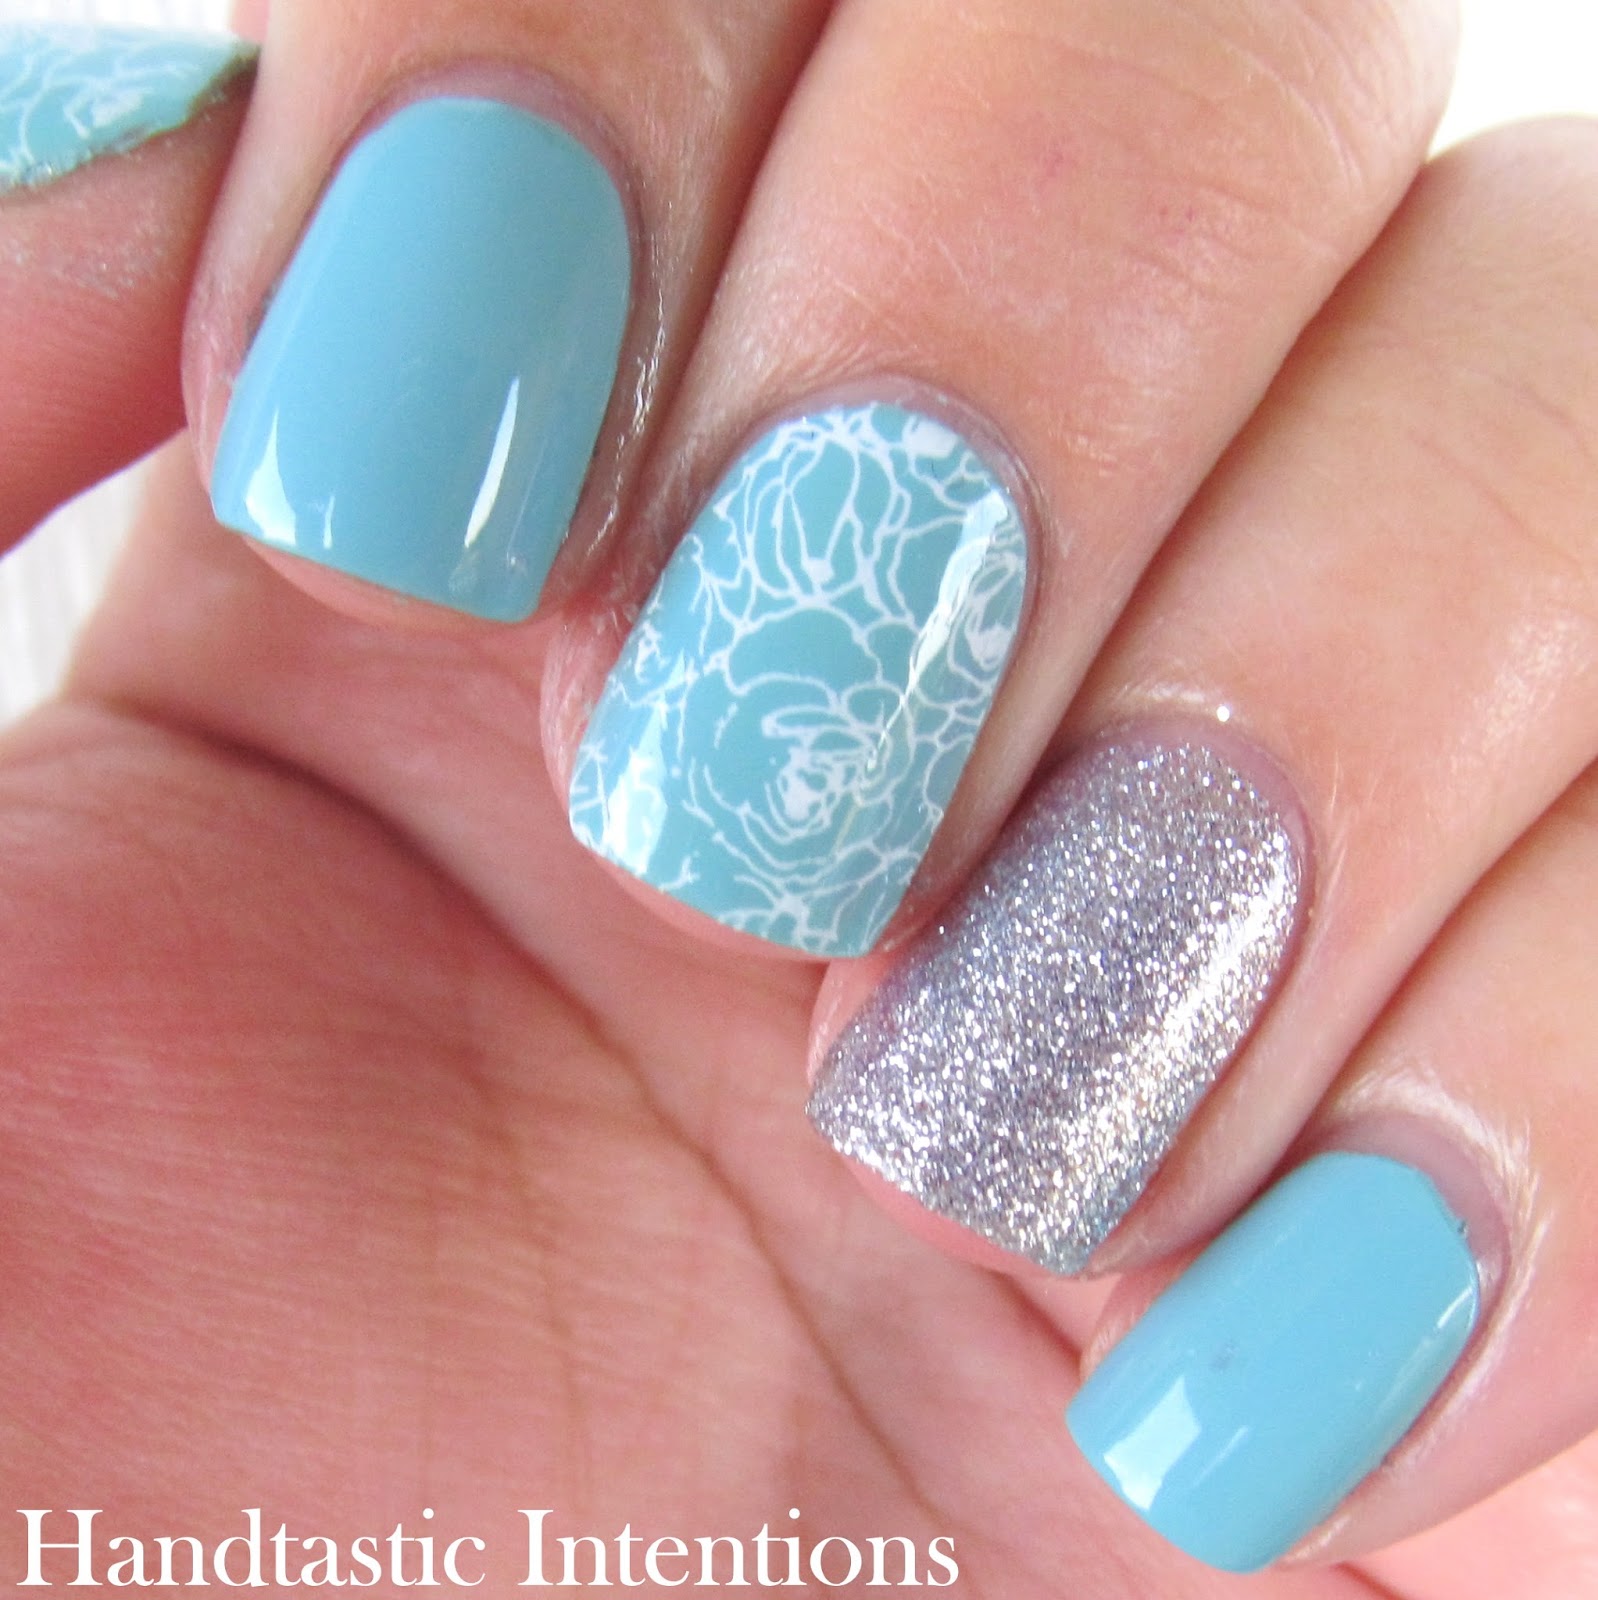 Handtastic Intentions: Nail Art: #31DC2014 Day 21 Inspired by a Color